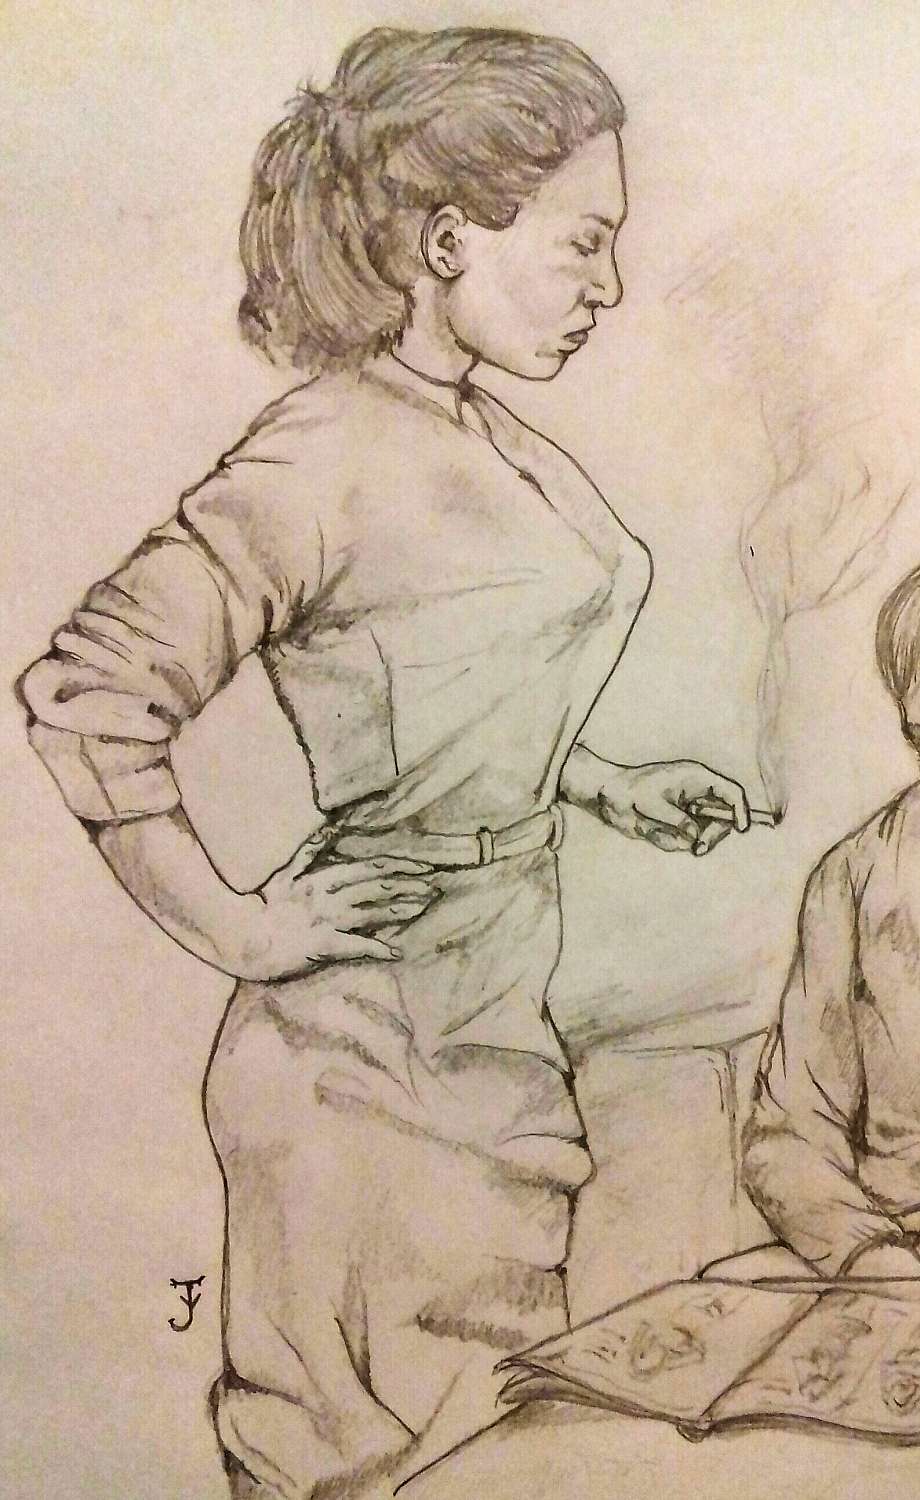 Woman with a cigarette in her hand